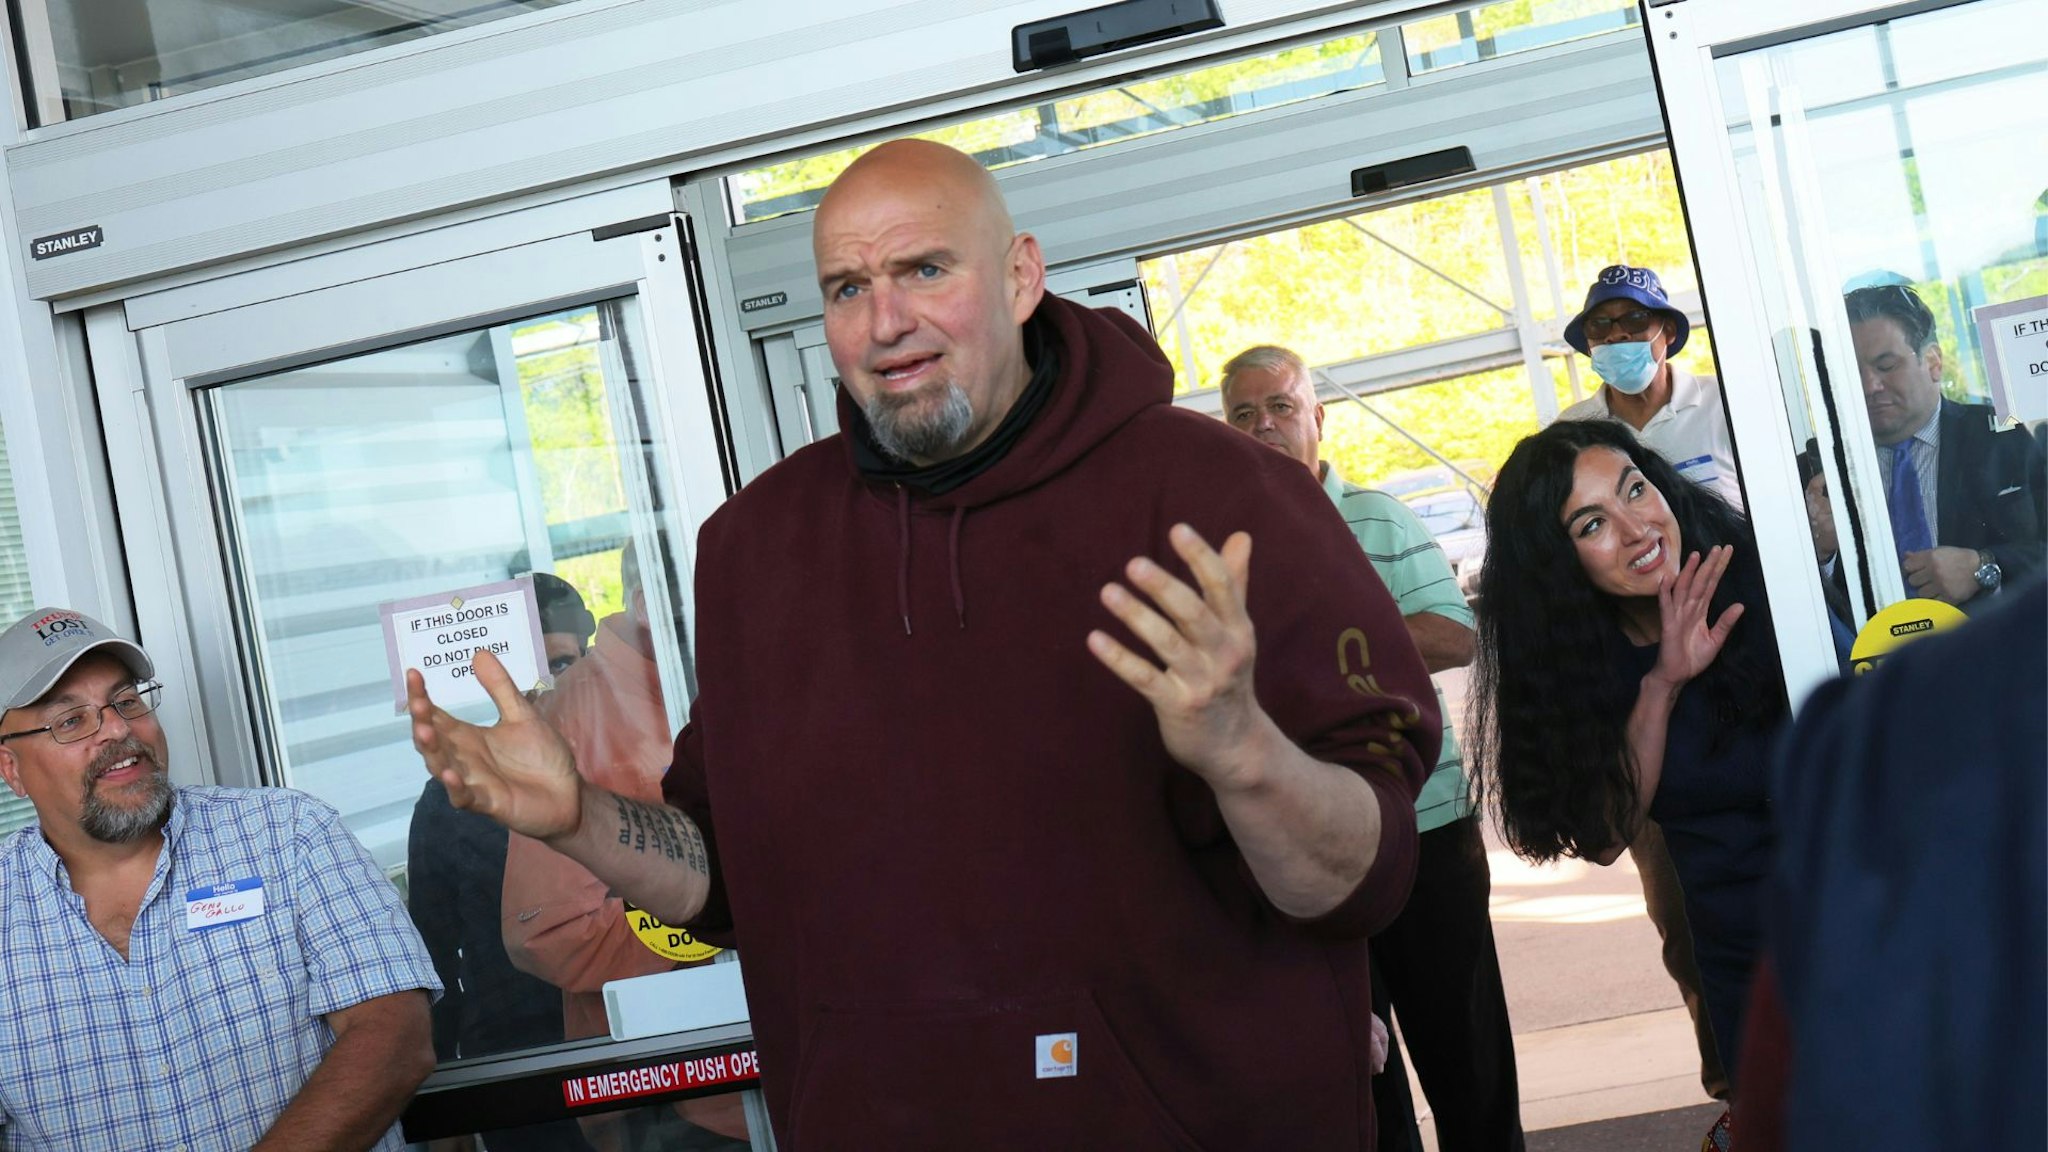 LEMONT FURNACE, PENNSYLVANIA - MAY 10: Pennsylvania Lt. Gov. John Fetterman arrives to campaign for U.S. Senate at a meet and greet at Joseph A. Hardy Connellsville Airport on May 10, 2022 in Lemont Furnace, Pennsylvania.